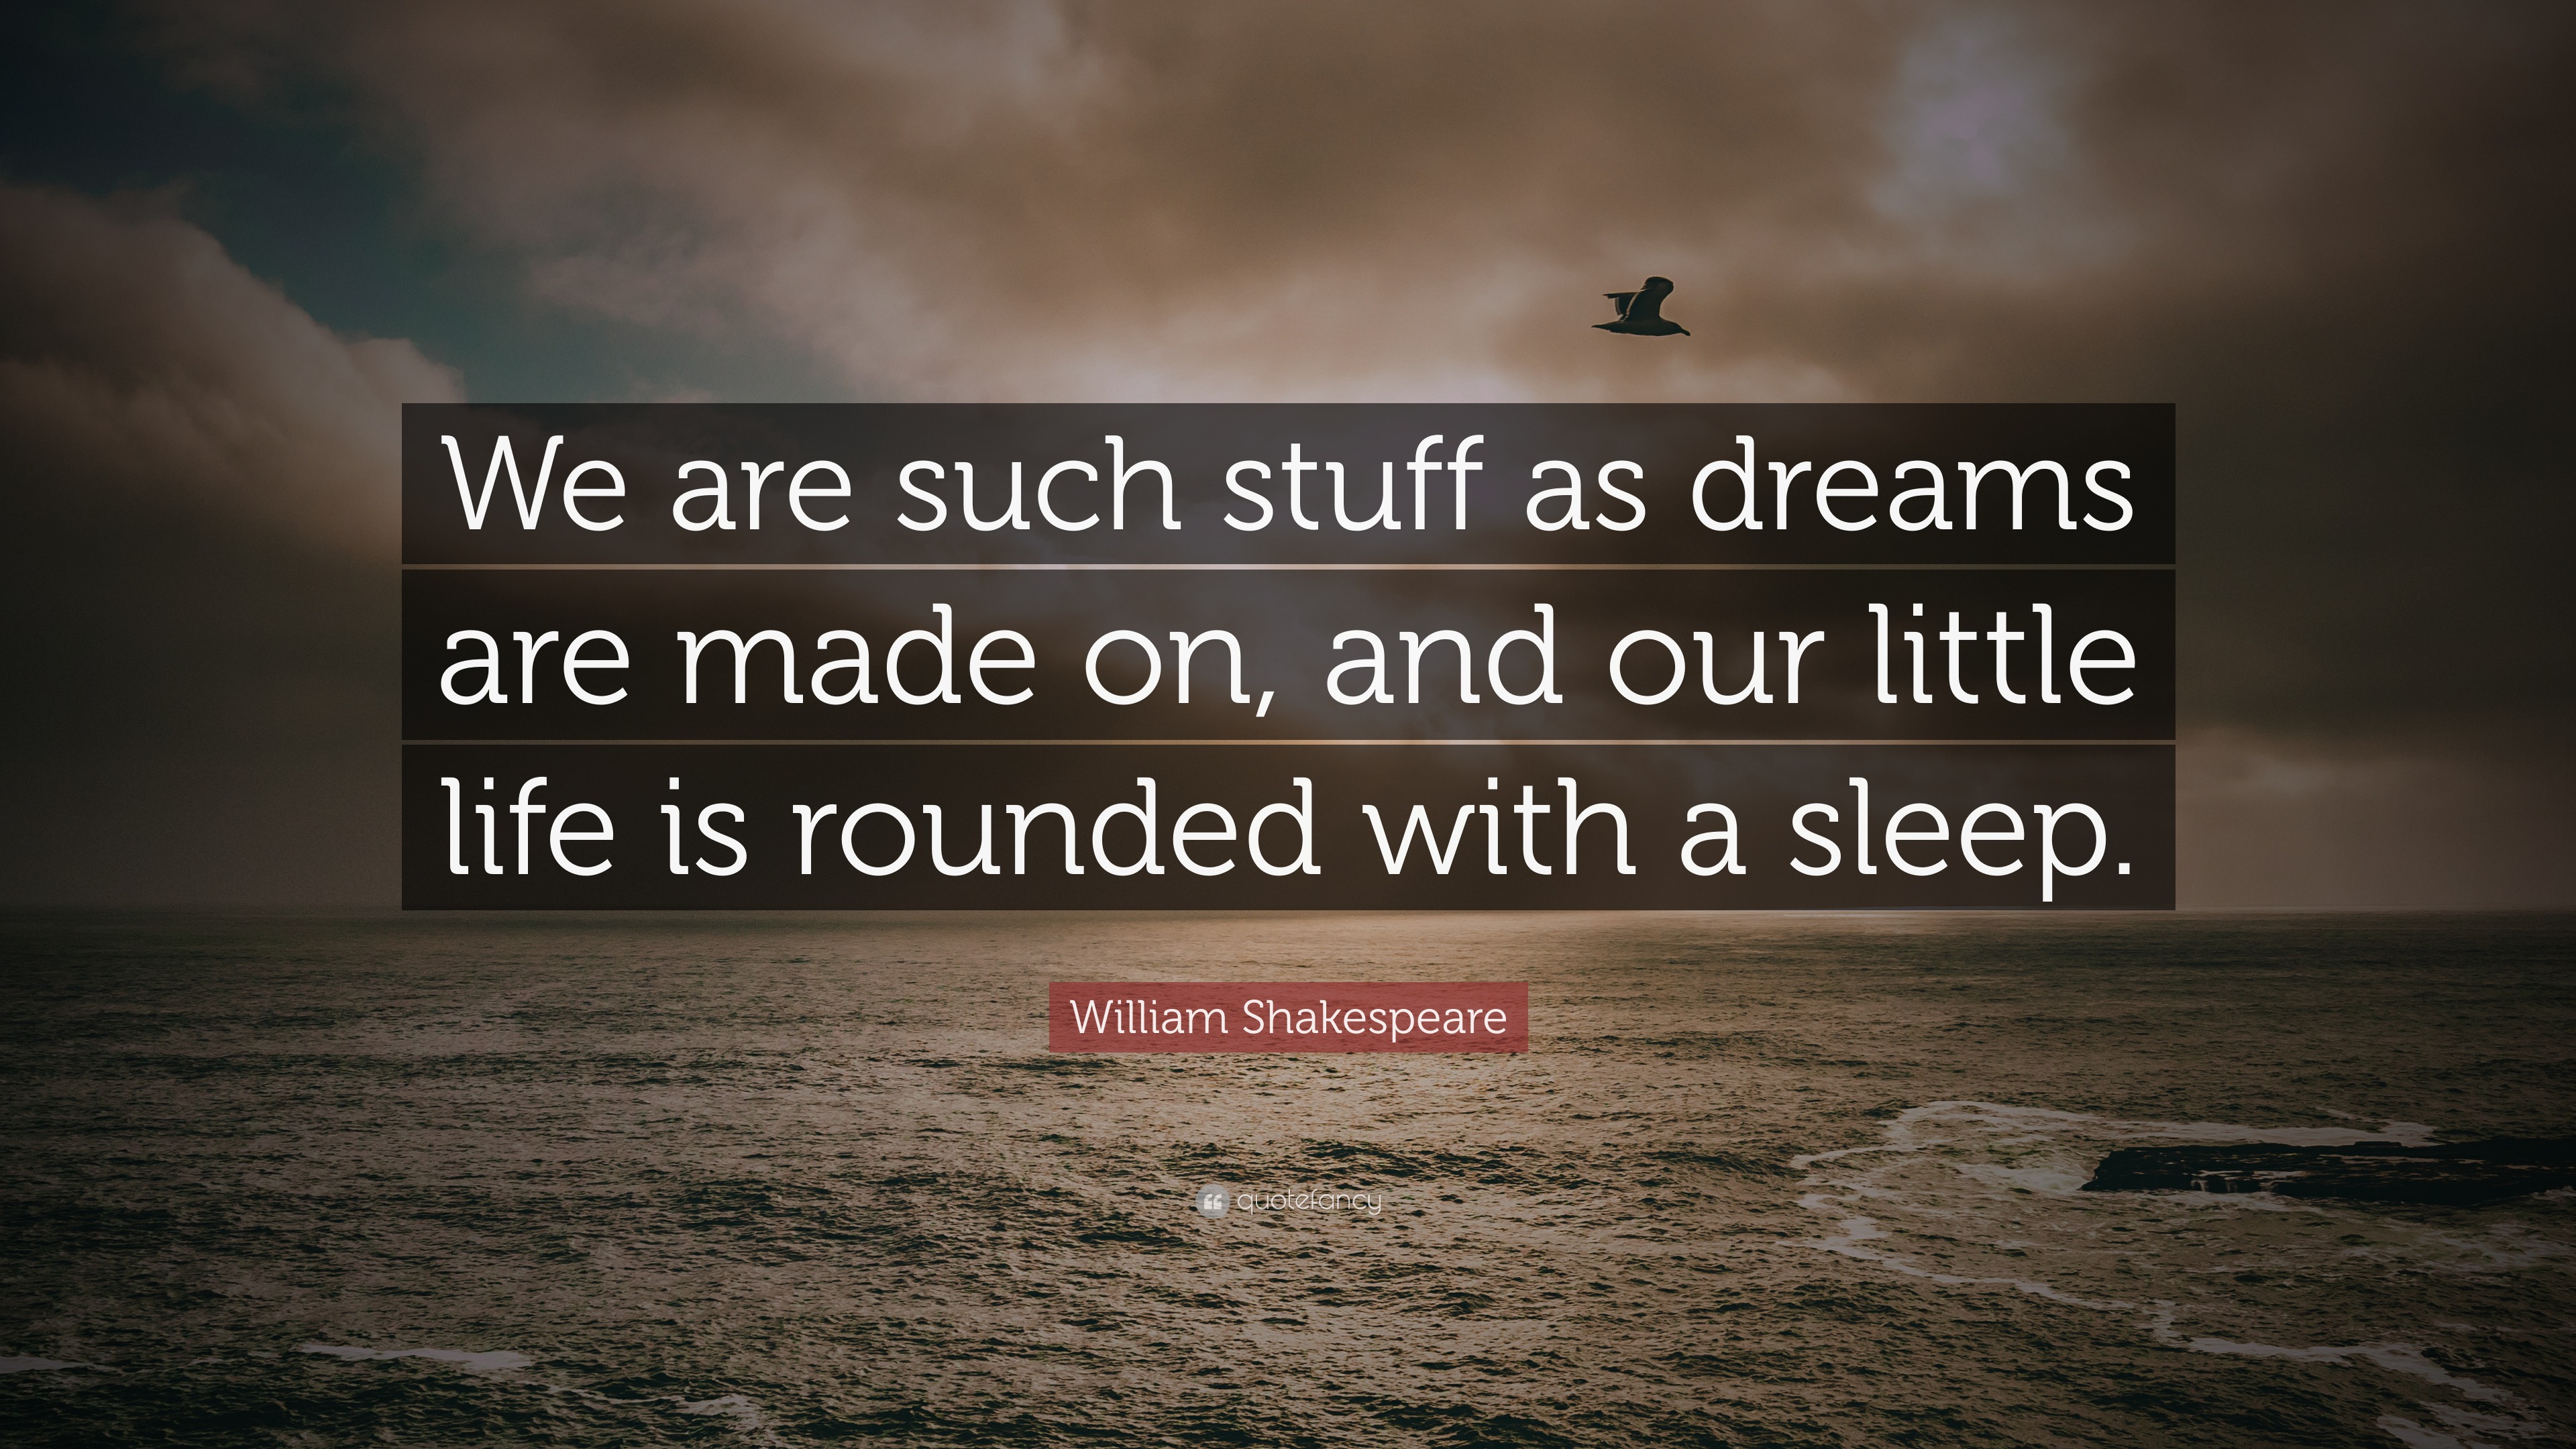 2064913 William Shakespeare Quote We are such stuff as dreams are made on